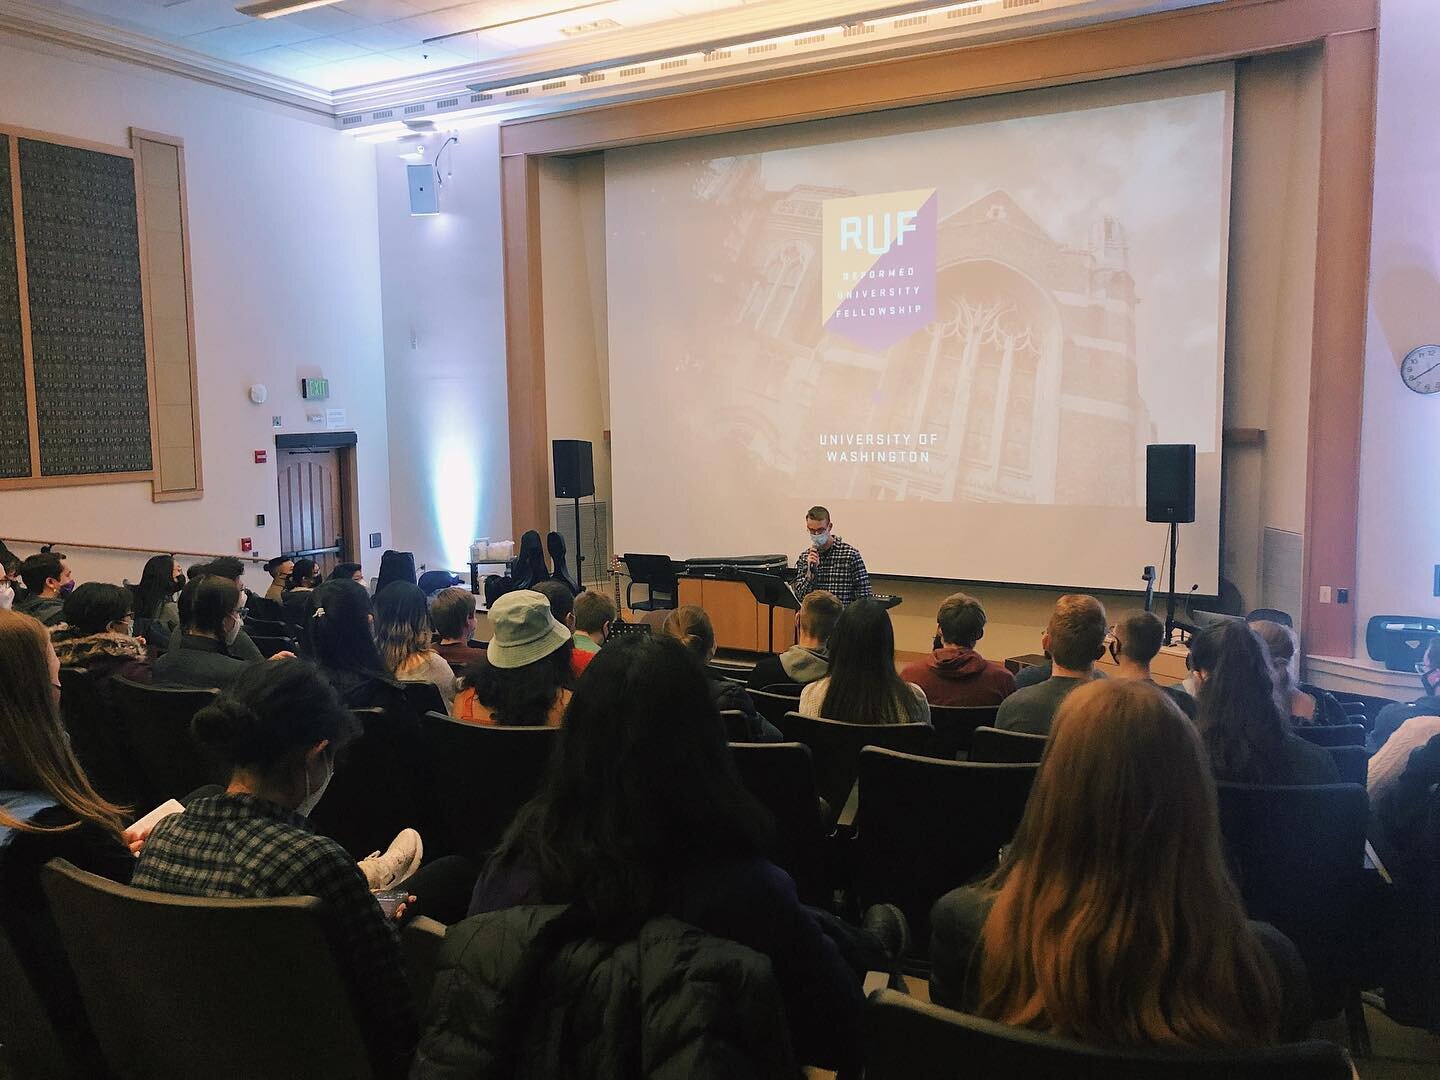 Not much is going on in RUF this week! So instead, take a look back on winter quarter, starting with when we were doing things on Zoom! Thank you to everyone who played a part in making this quarter a good one!
&middot;
No Bible studies or large grou